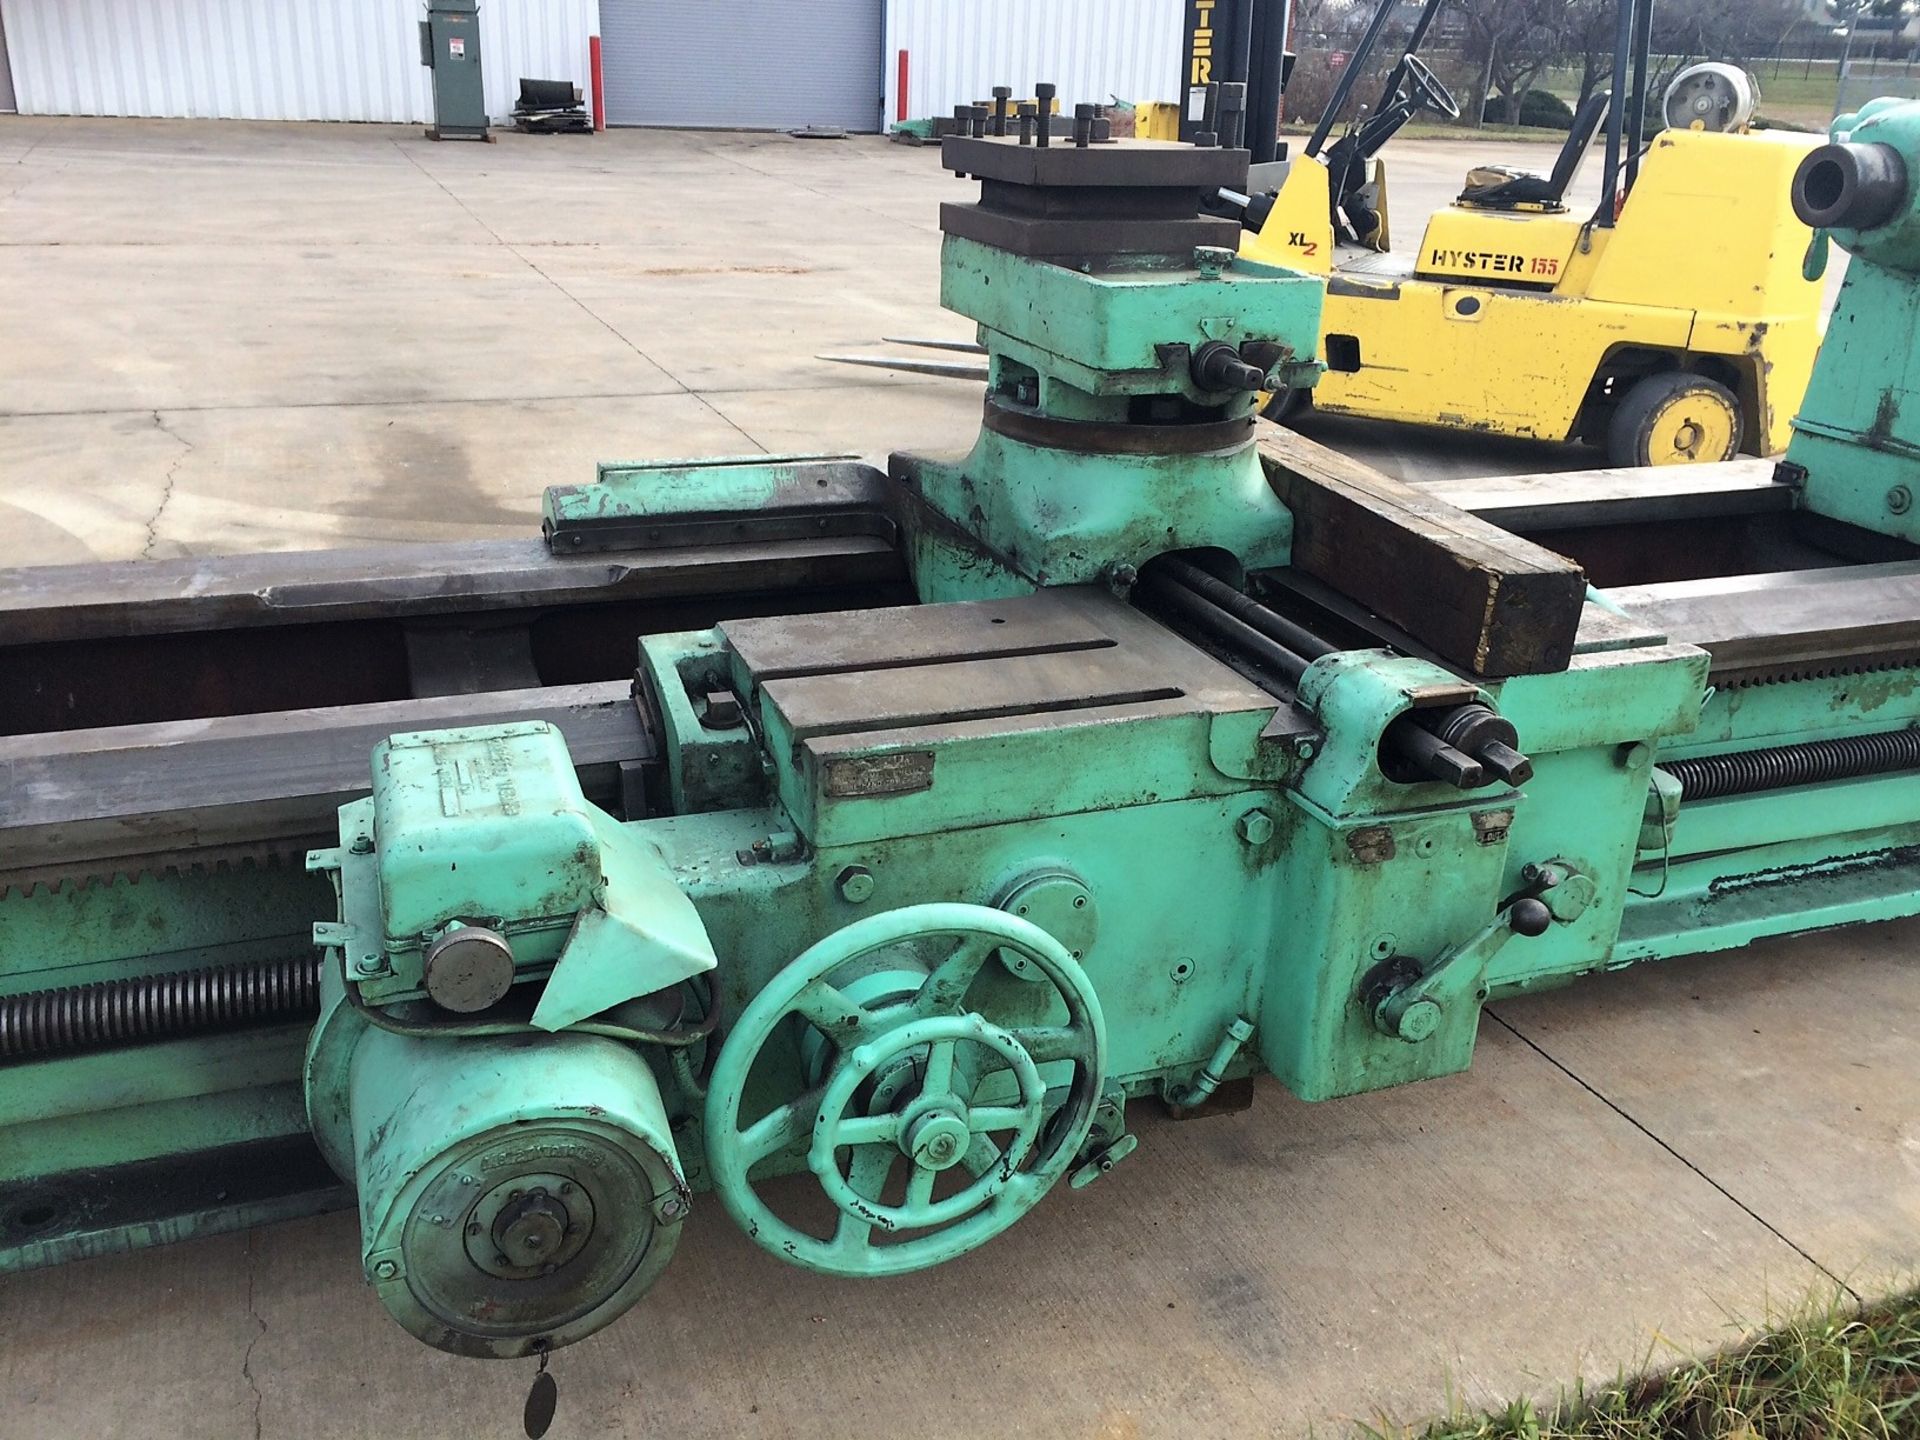 50”X180” NILES ENGINE LATHE, 40” OCS, 94 RPM, FACEPLATE WITH JAWS, 30 HP 440 VOLT, S/N: 22040 - Image 3 of 5